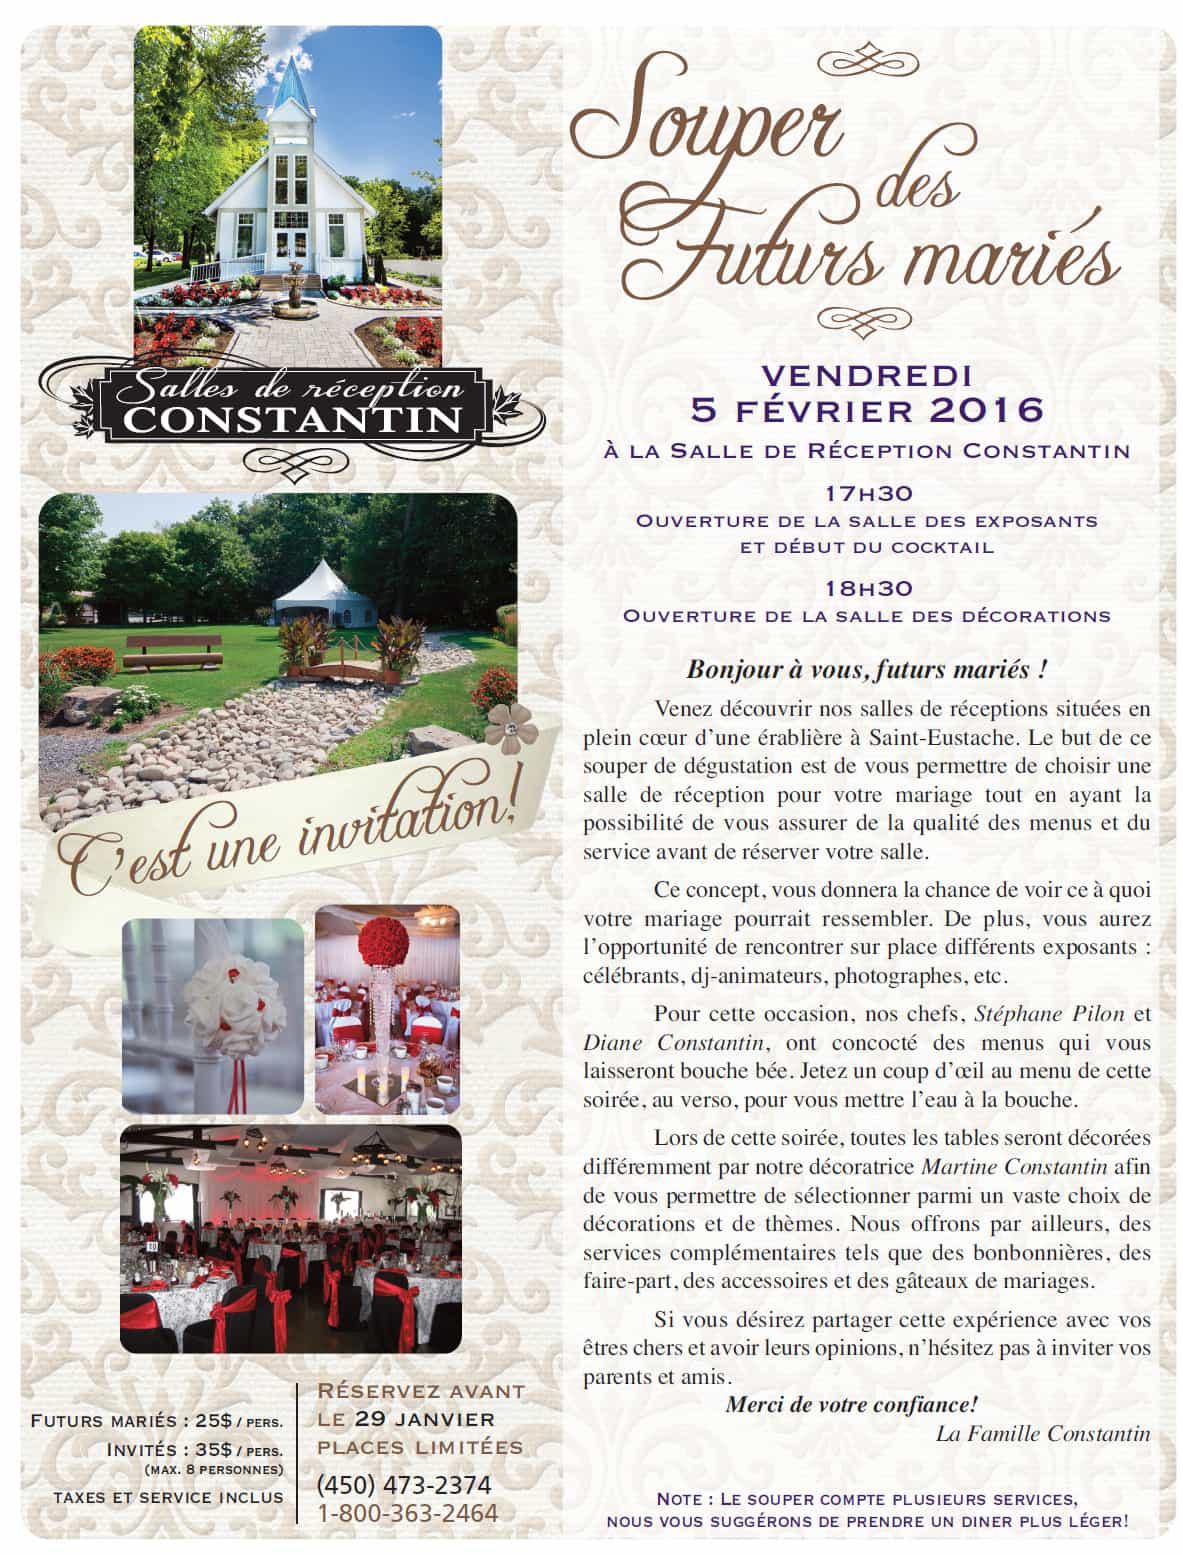 rencontres amicales 28